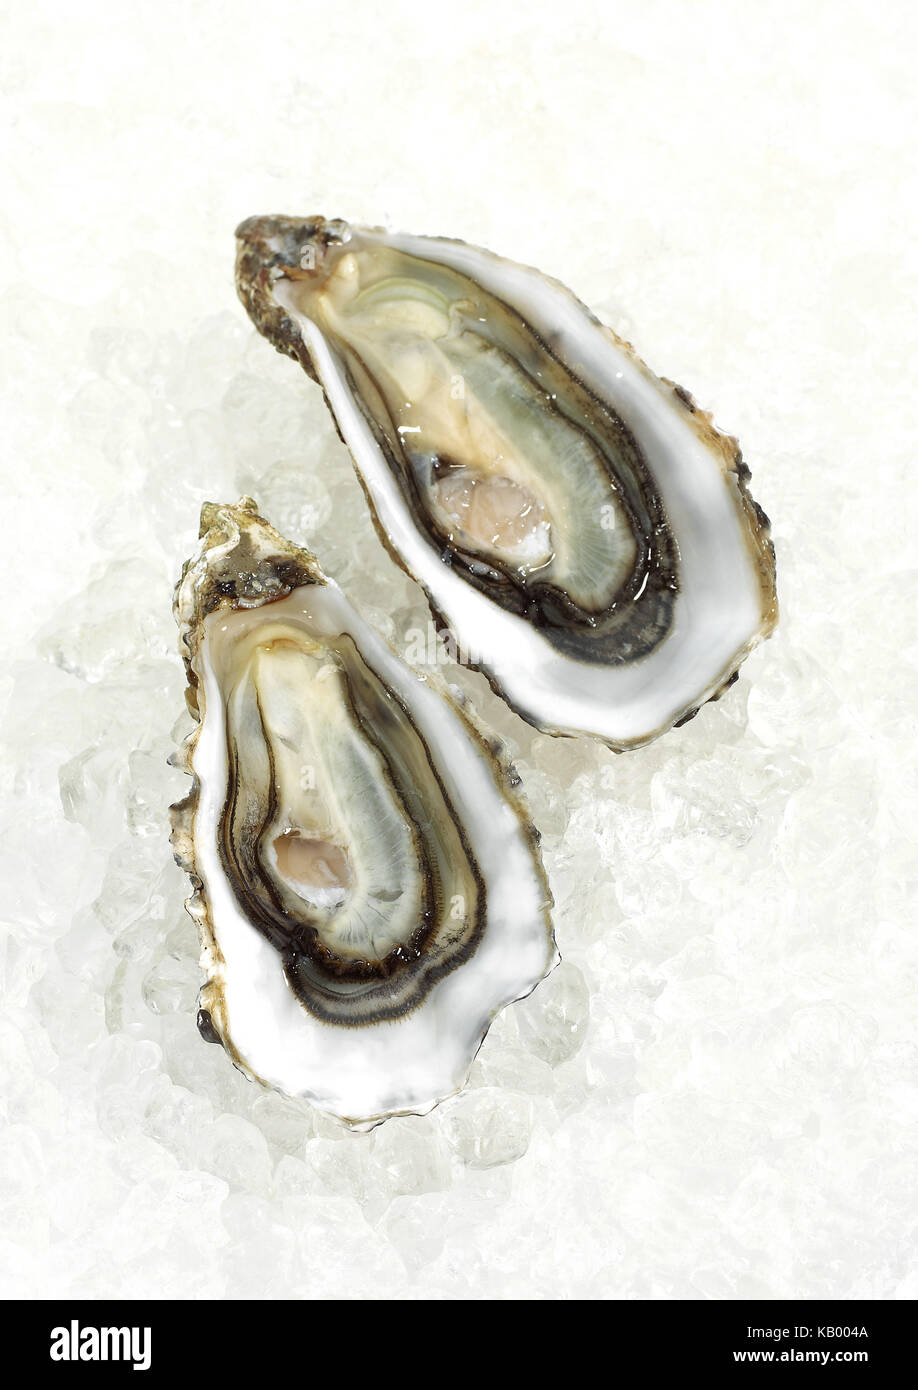 French oyster 'Marennes d'Oleron', fresh seafood on ice, Stock Photo